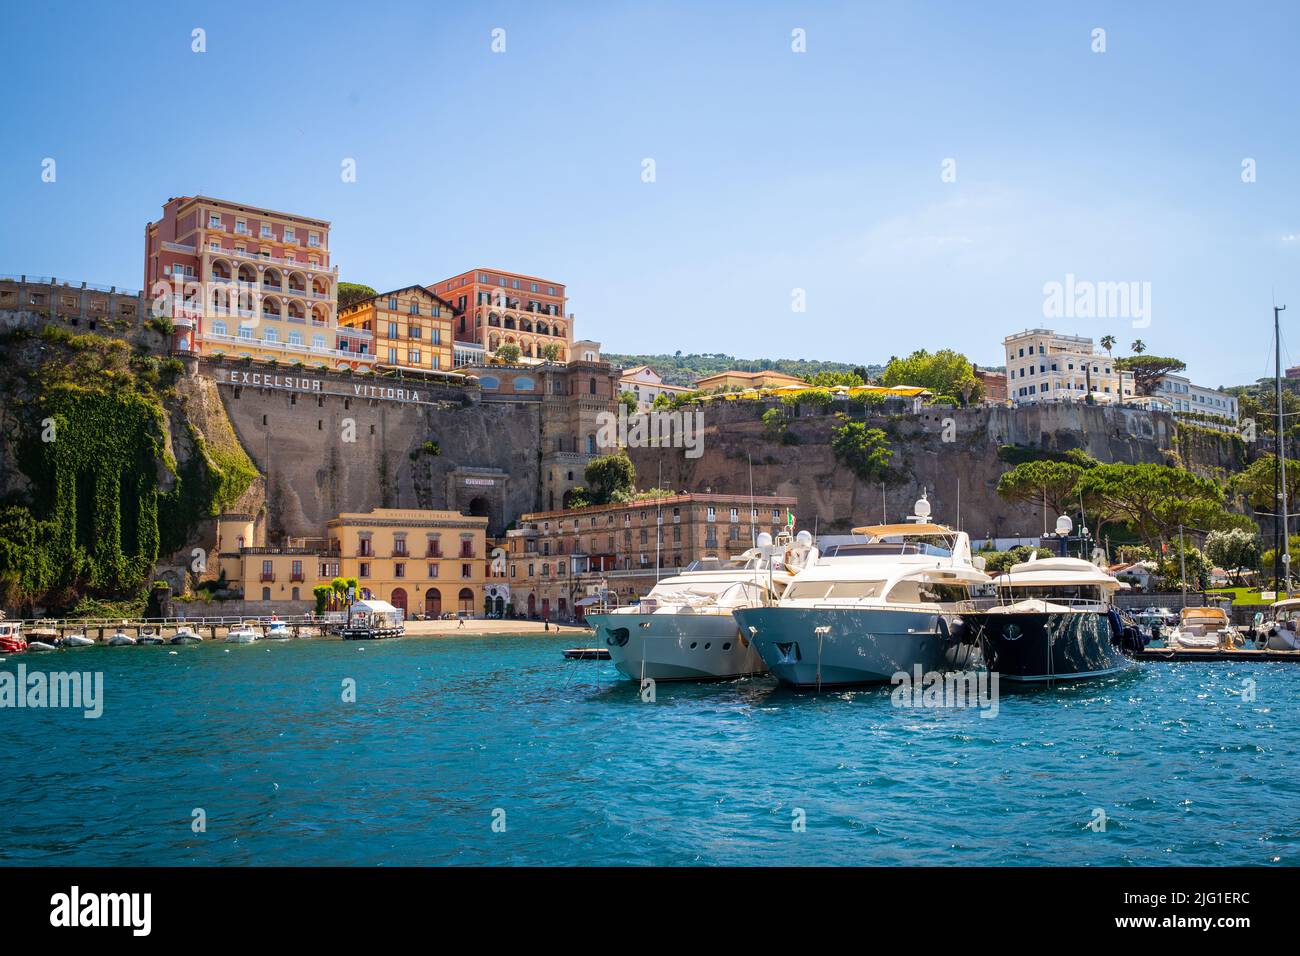 View of the cliffs and the Grand Hotel Excelsior Vittoria in Sorrento from the port Stock Photo